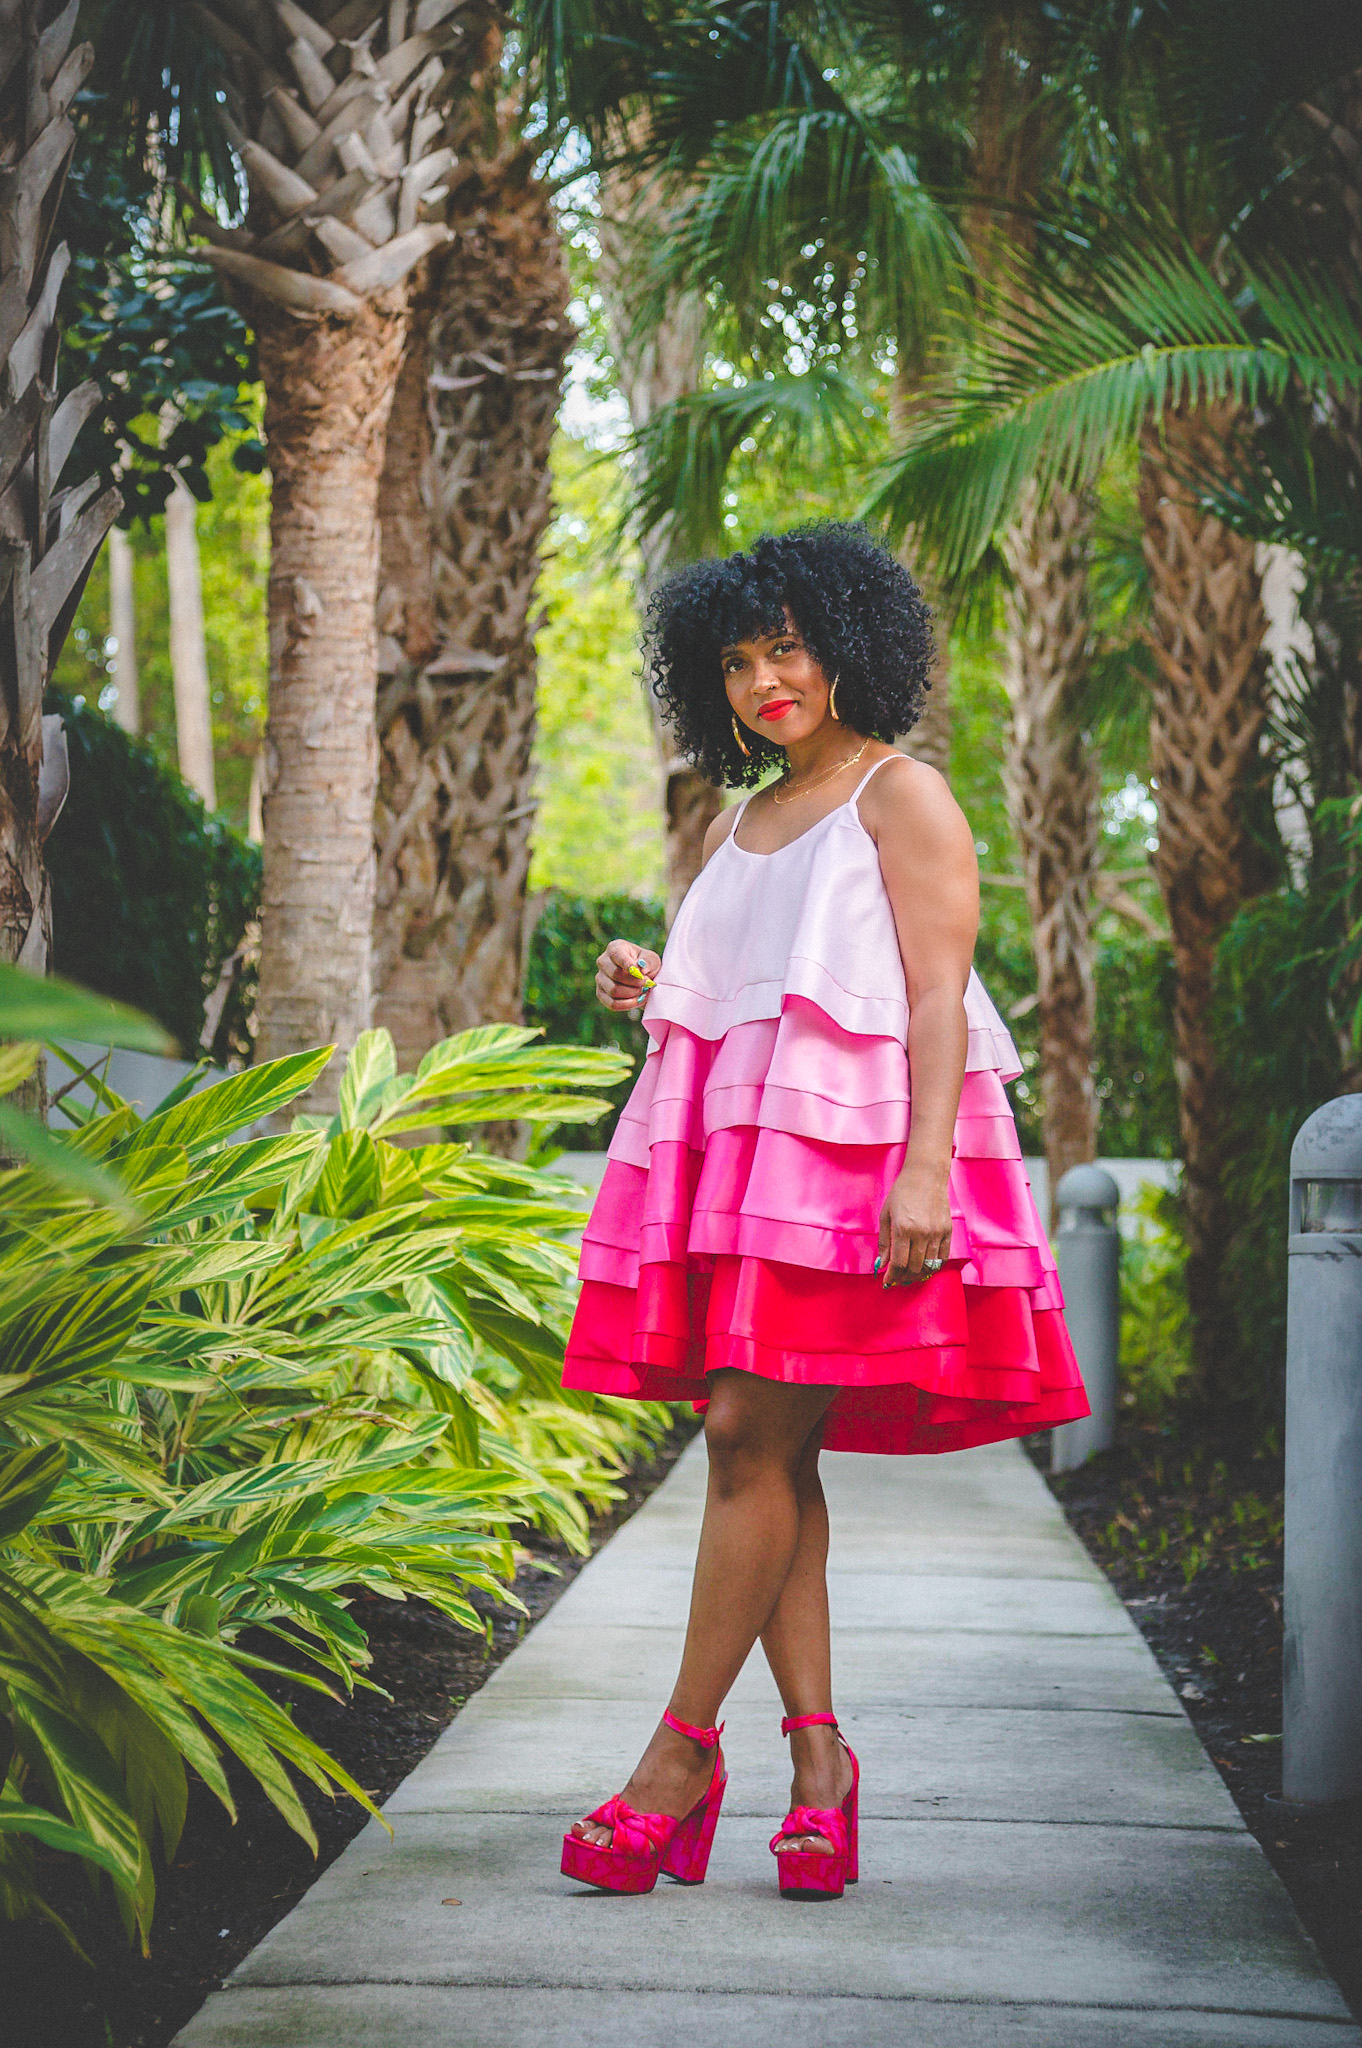 Sweenee Style, Spring/Summer Style, Indianapolis Fashion Blog, Indianapolis Fashion Influencer, Natural Curls, Adrienne from Sweenee Style, Spring Dresses, Summer Dresses